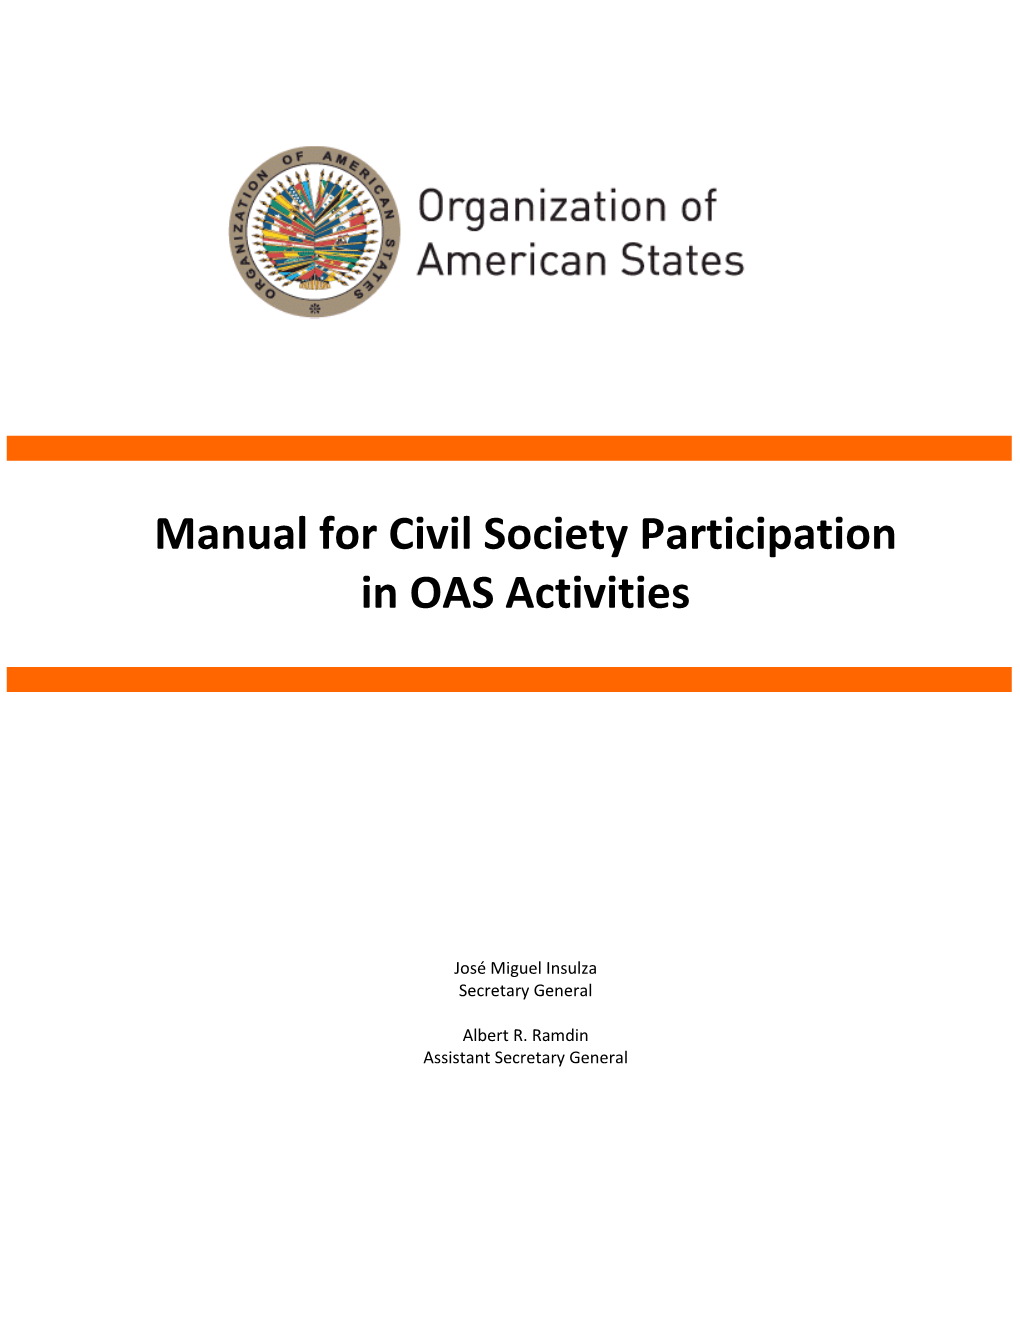 Manual for Civil Society Participation in OAS Activities